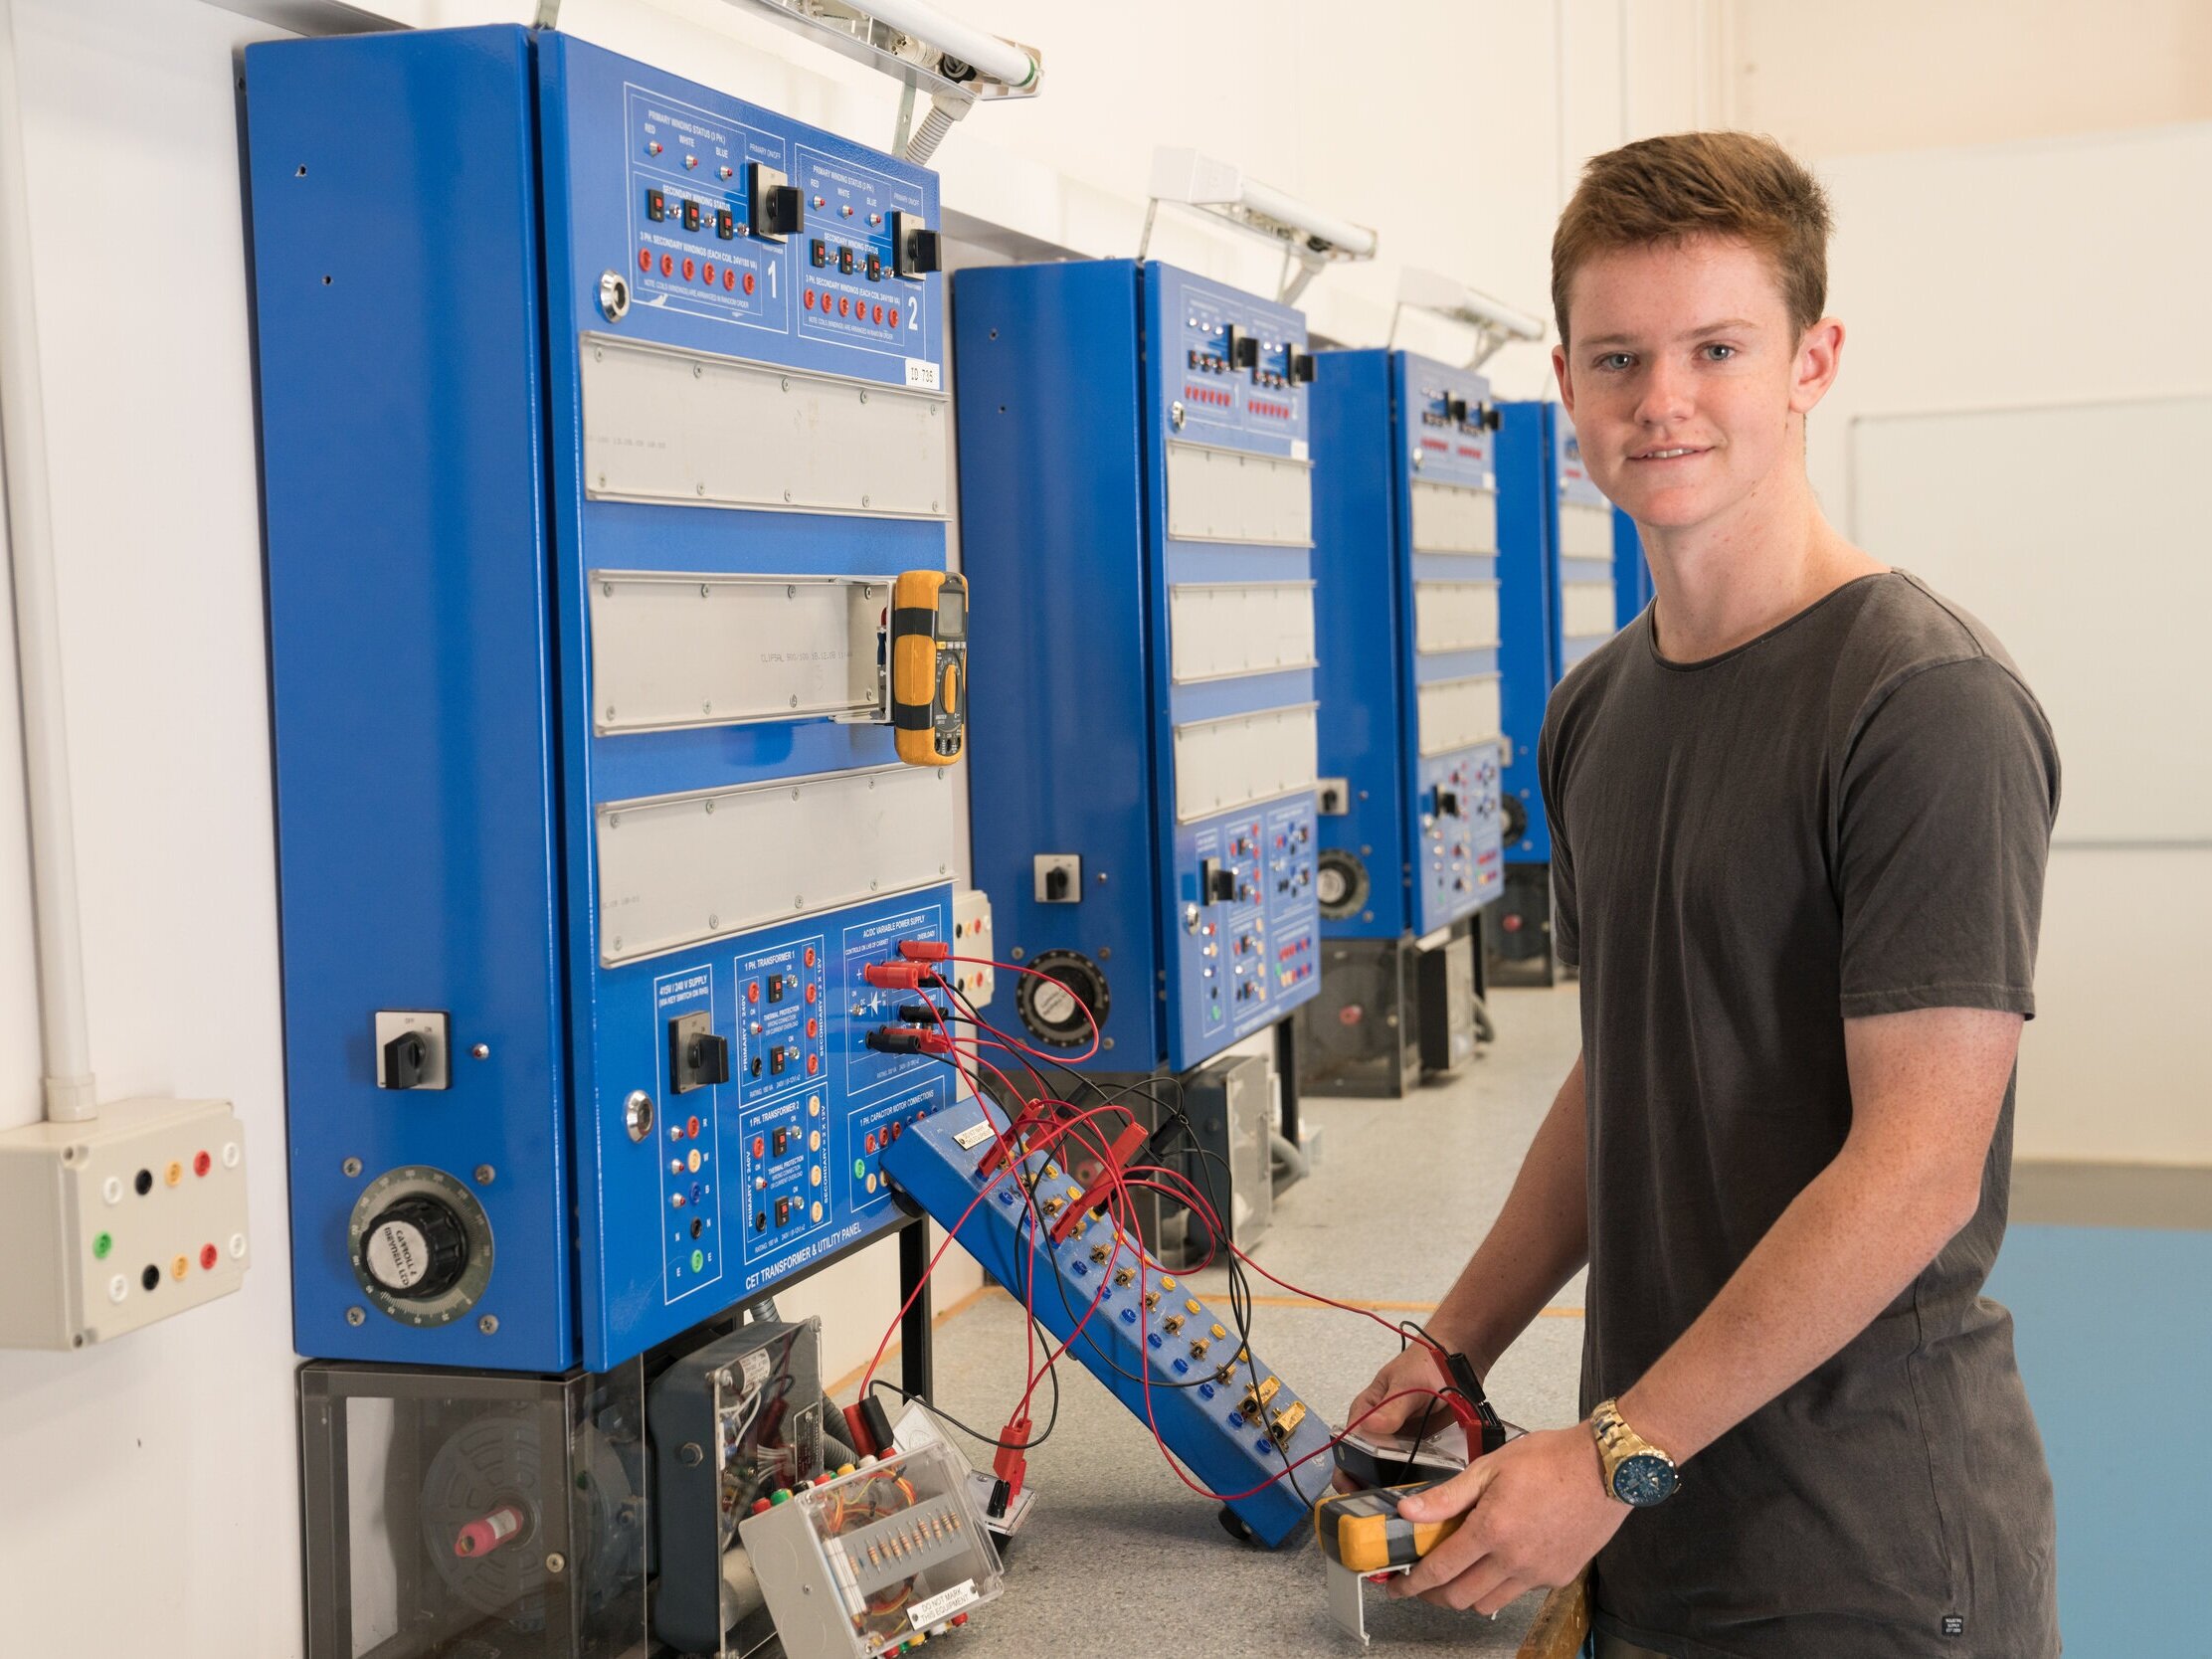 Ronan McGrath completed a Pre- Apprenticeship with 台湾a片Search of Electrical Training and a work placement which contributed to WACE. Upon graduation, he was successful in gaining a full time apprenticeship.